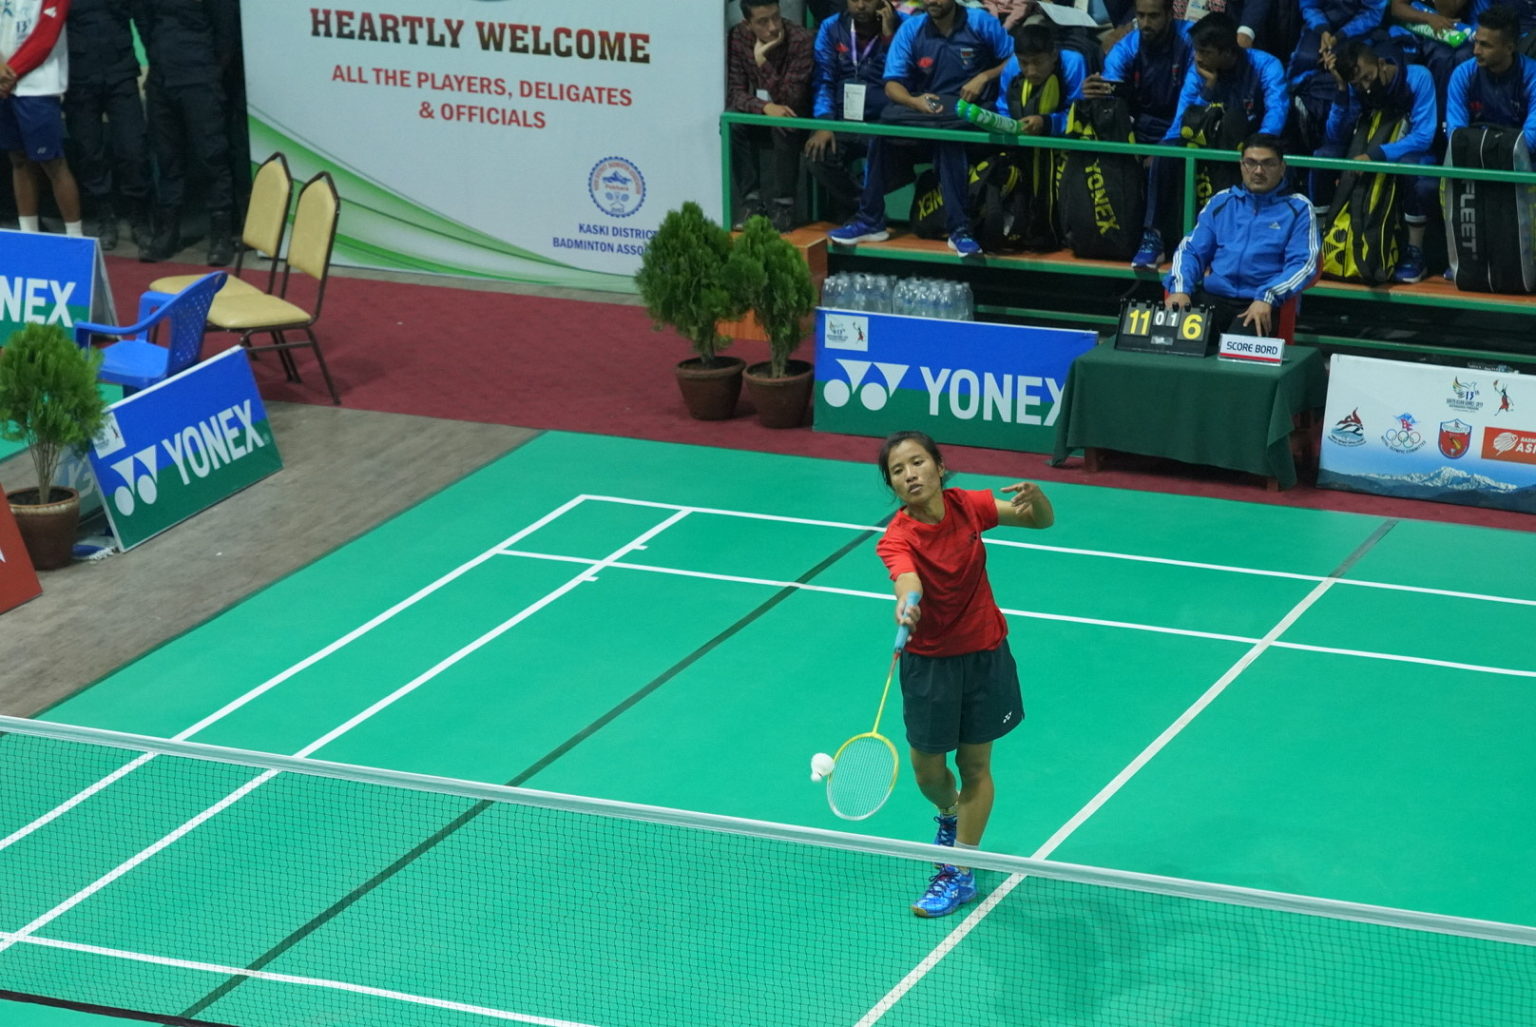 Nepal makes it to semifinals in badminton